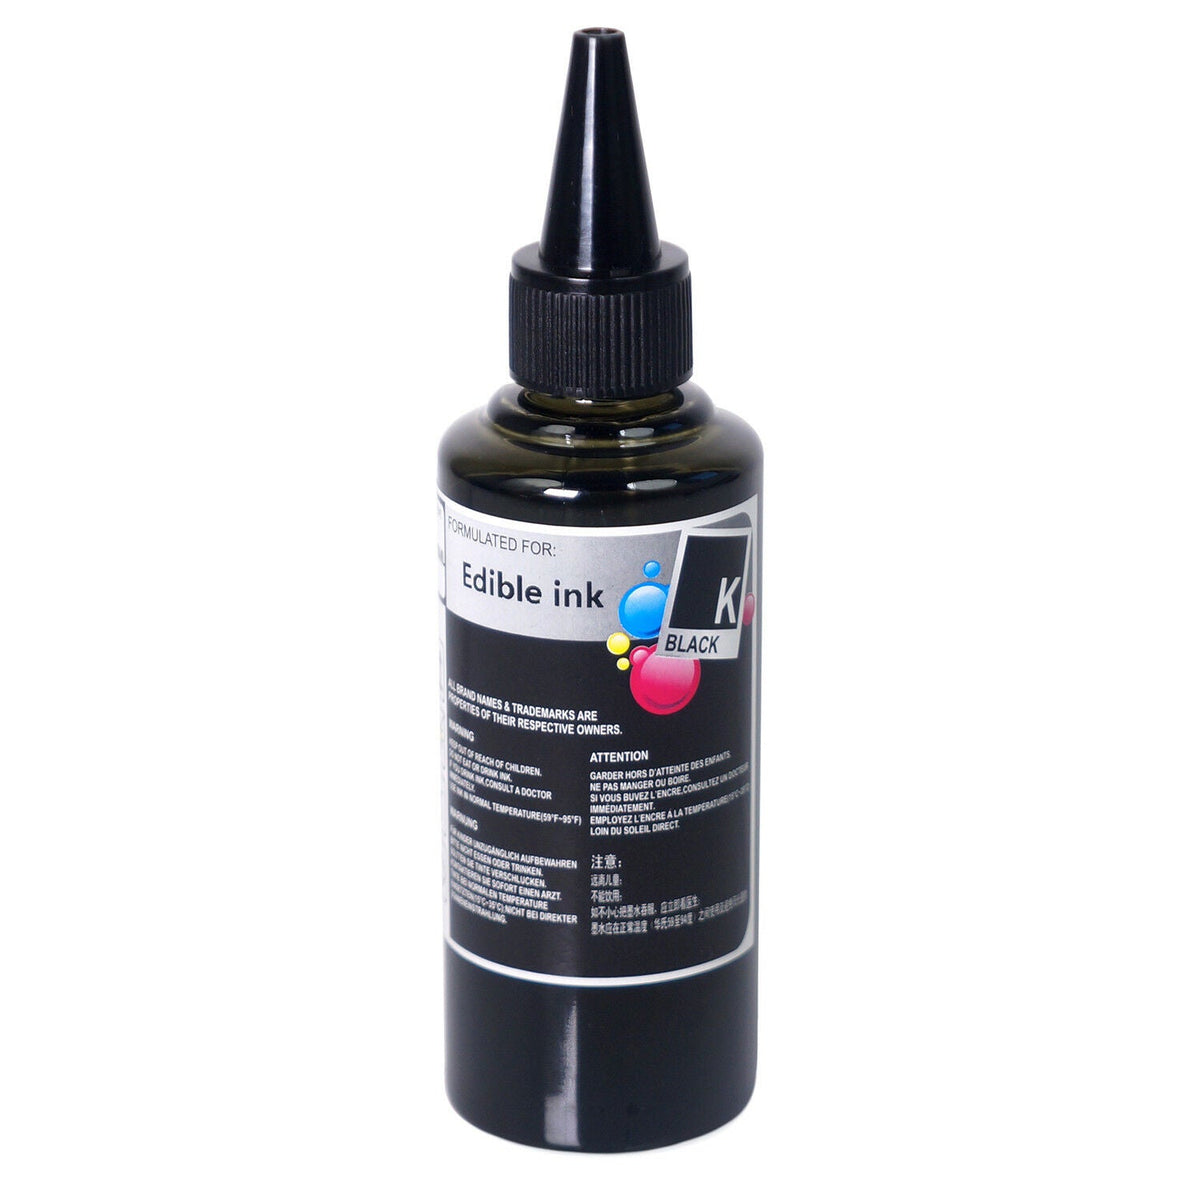 100ml Black Edible Ink Refill Bottle Compatible for Canon Cartridge